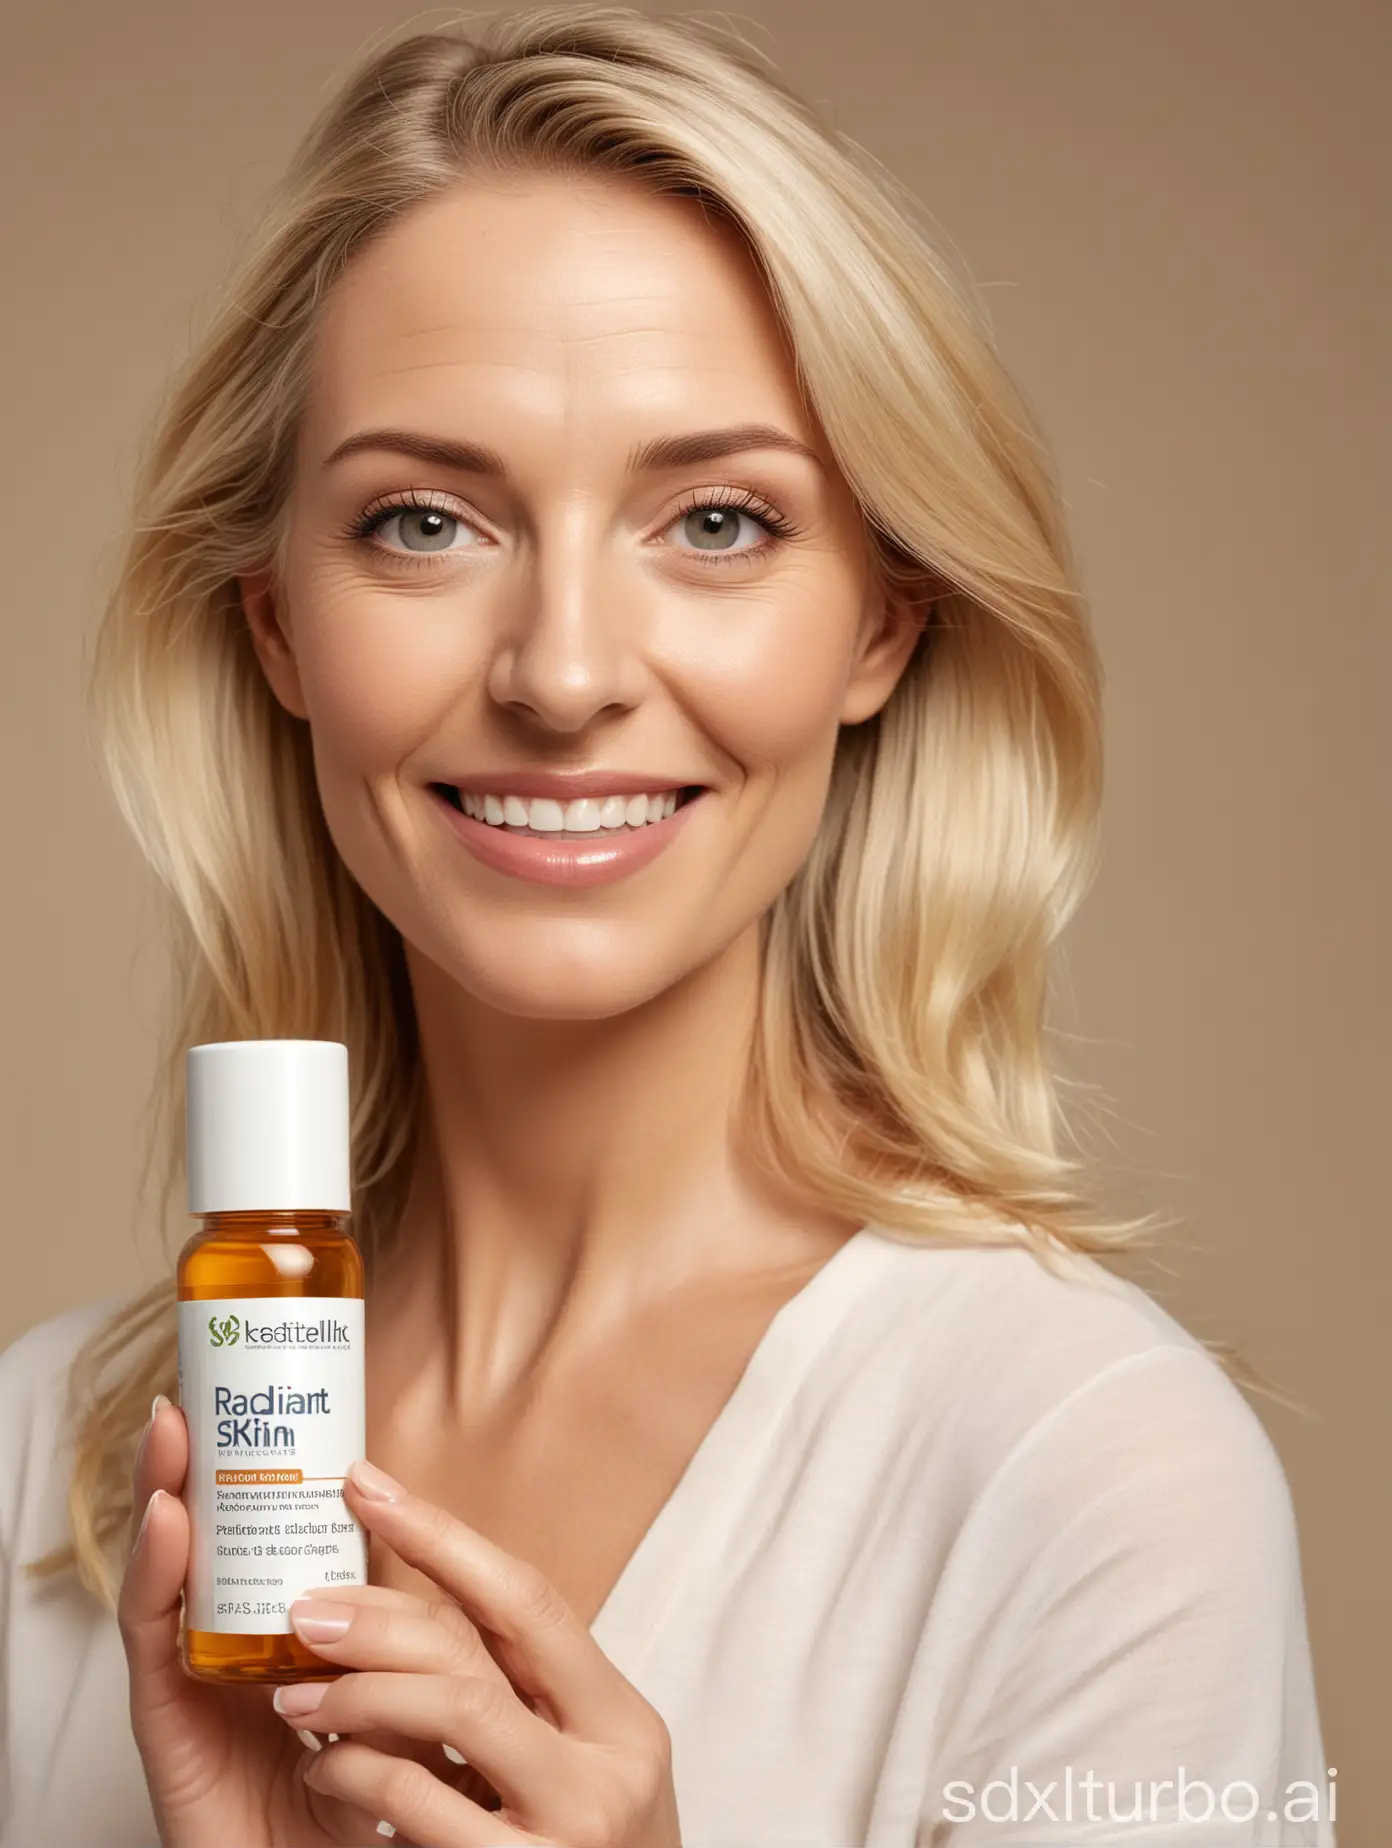 Radiant Skin Natural Beauty Skincare Product Advertisement, 45 year old blonde woman holding a 4 inches tall pills bottle